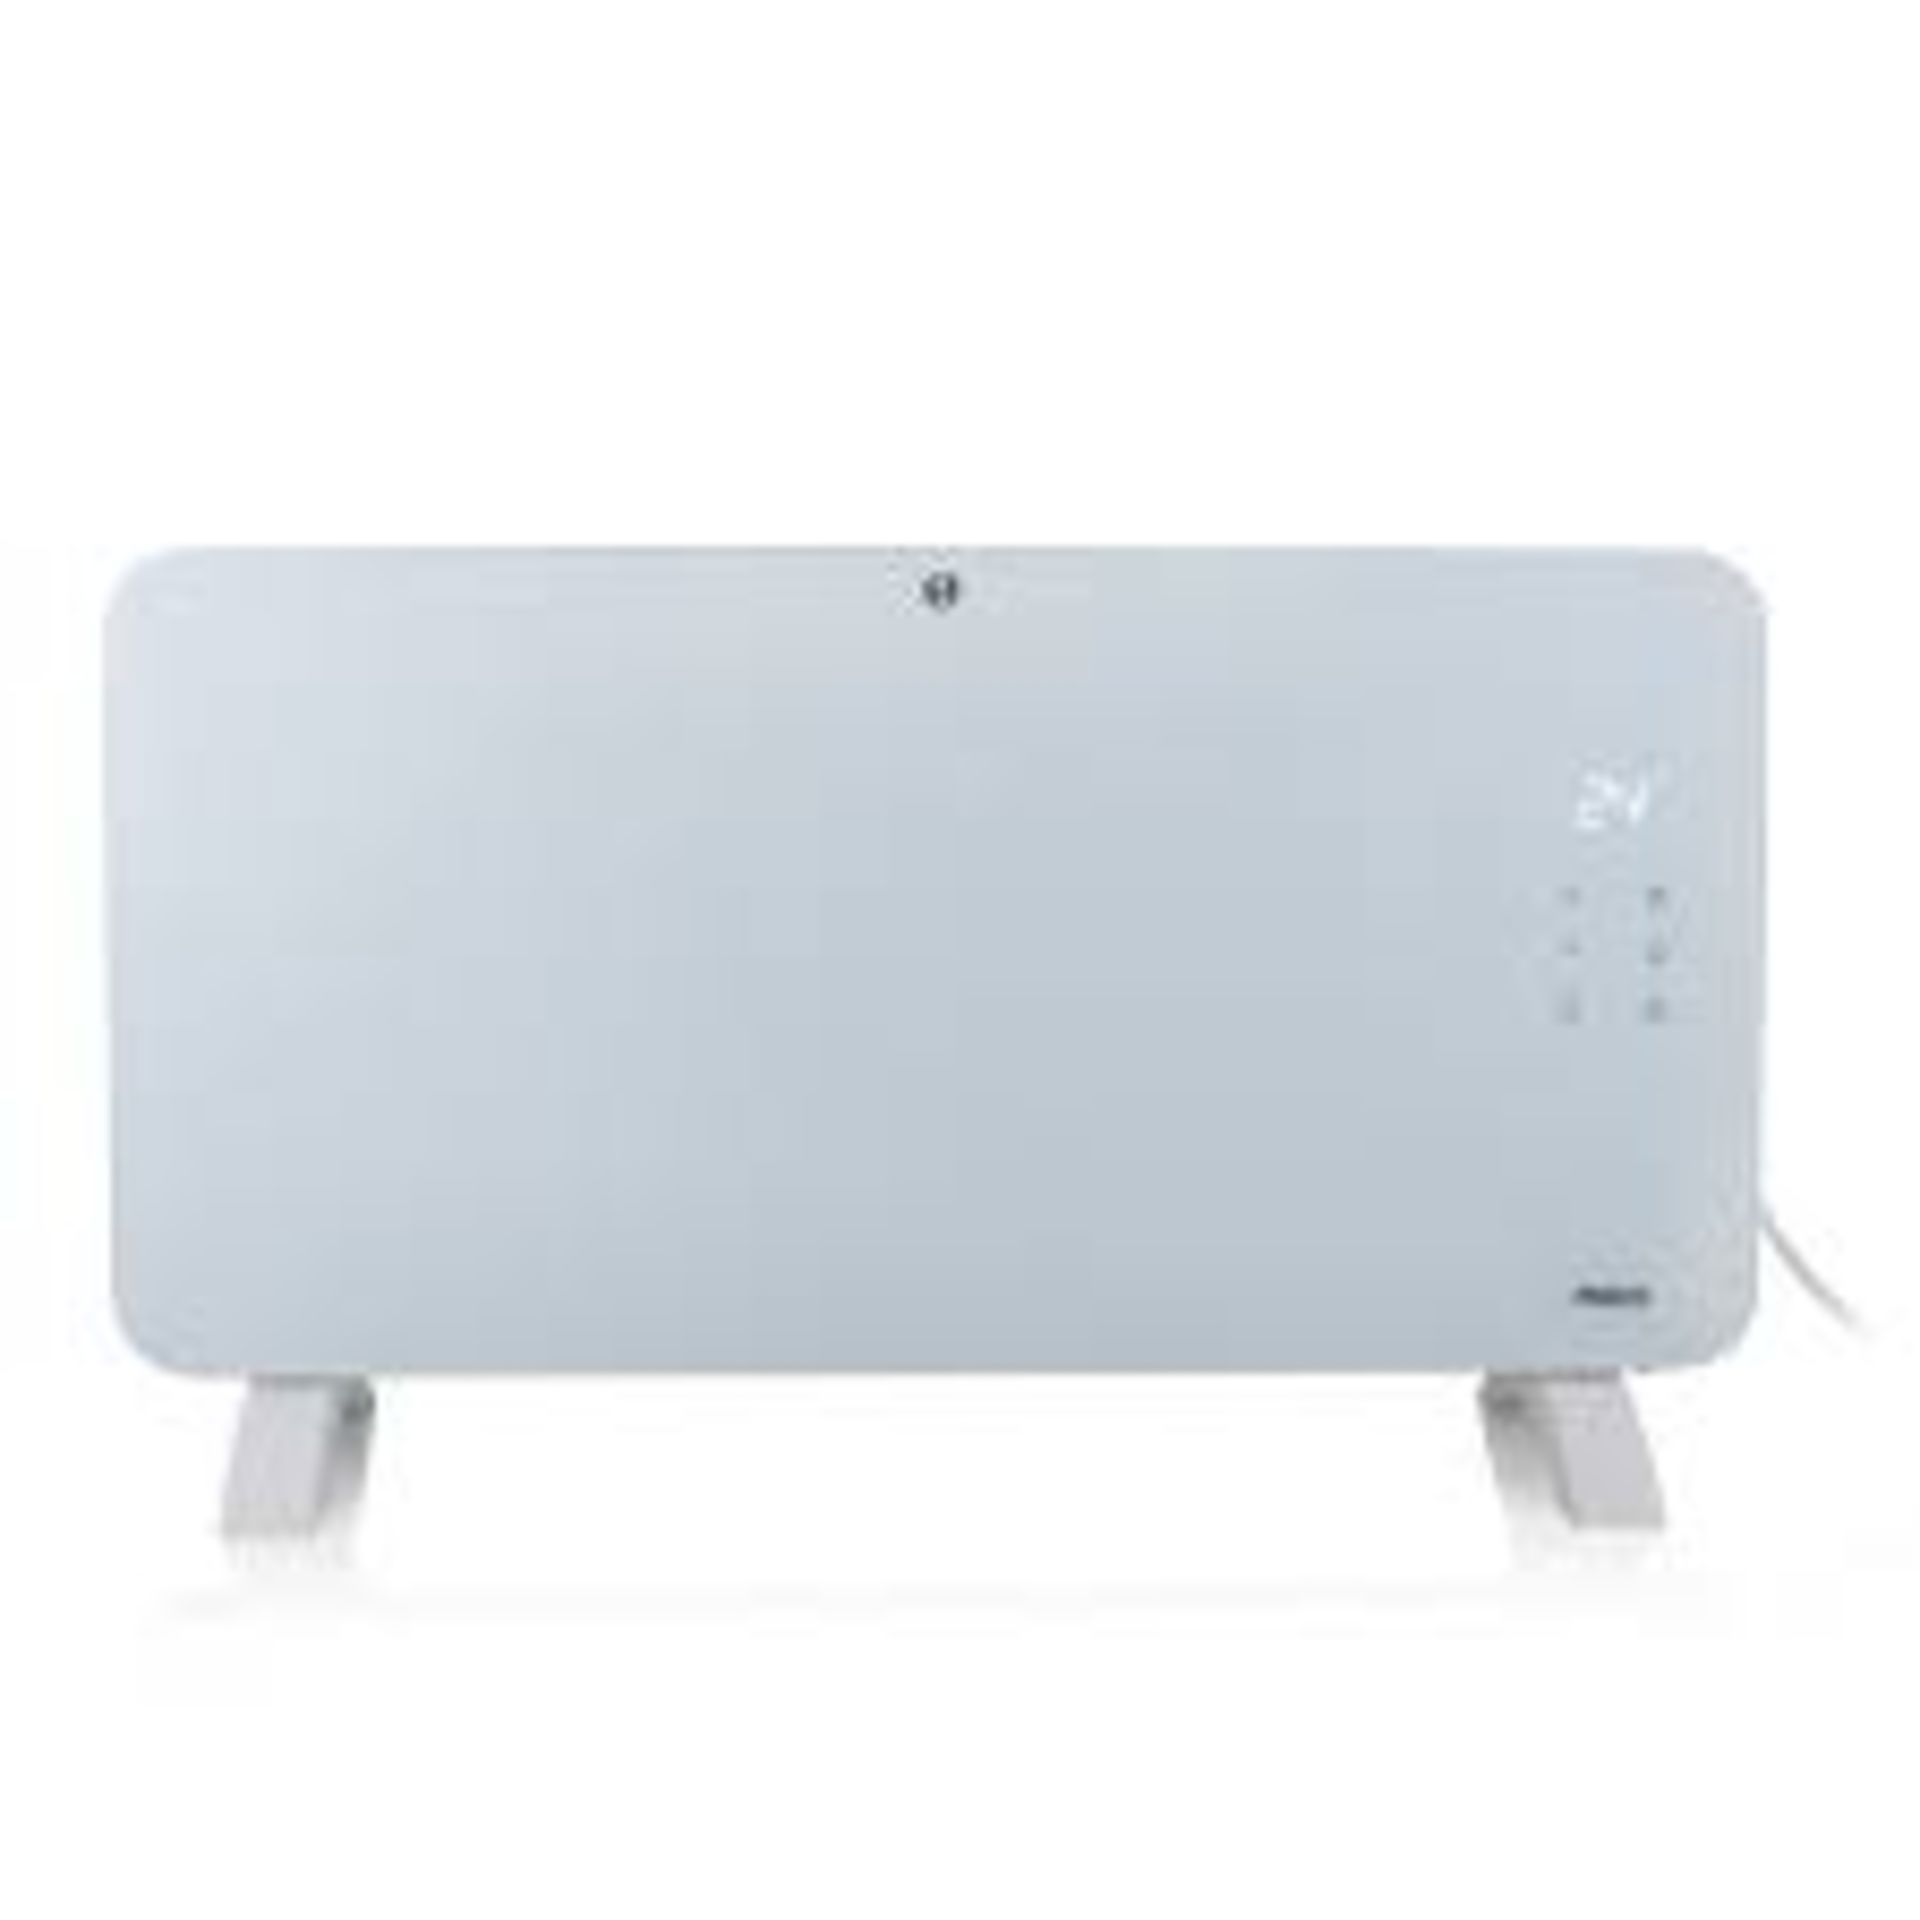 Princess Electric 1500W White Smart Panel heater. - S2.2. Suitable for any room in the house,